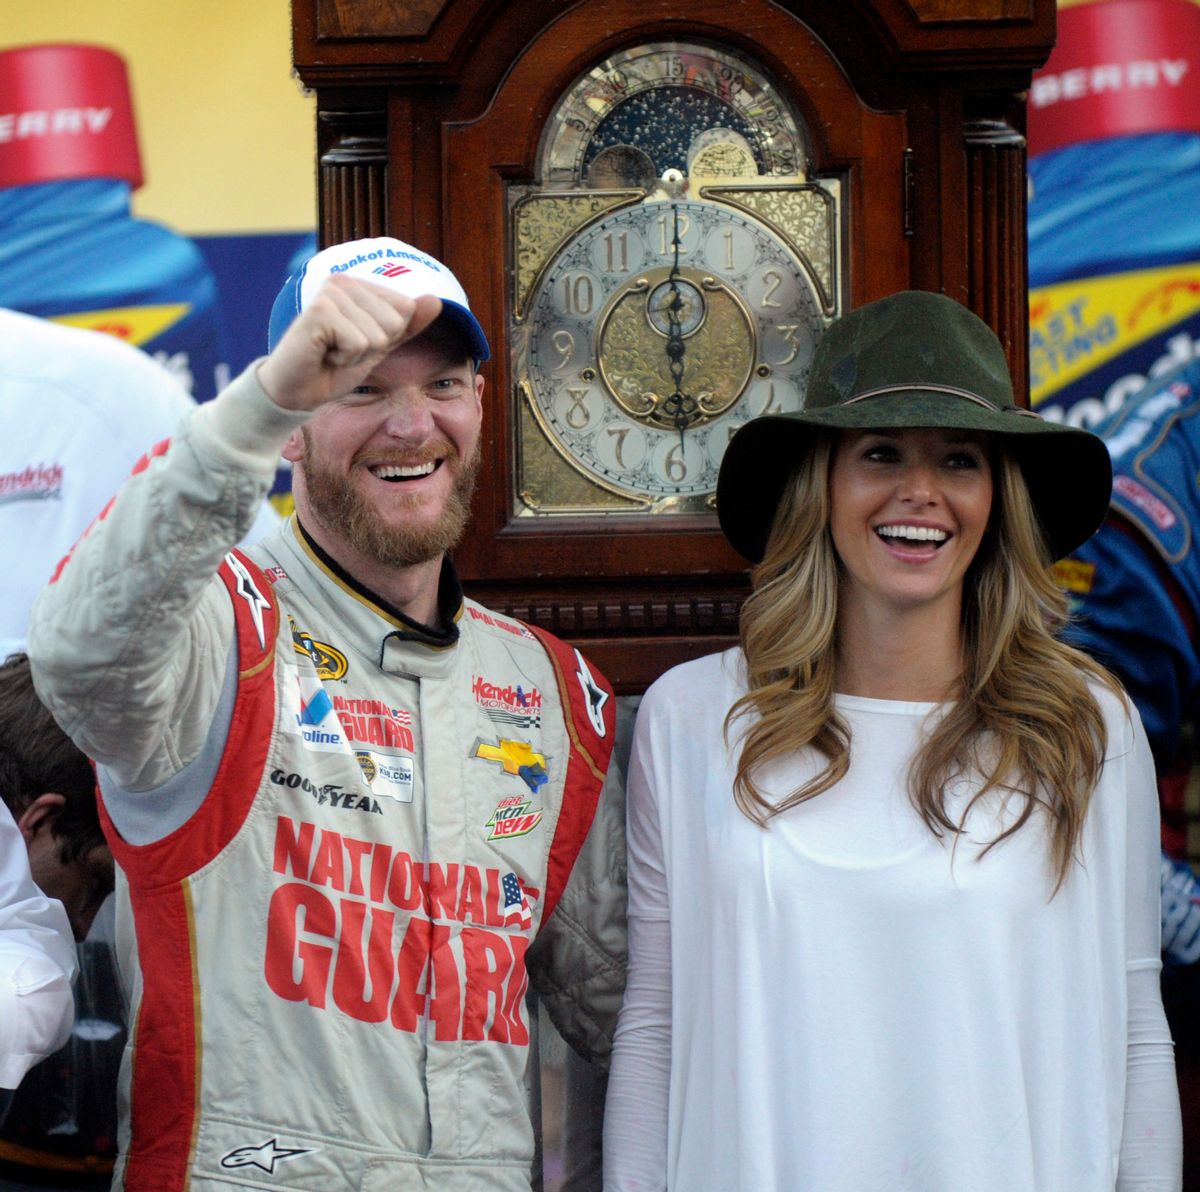 Dale Earnhardt Jr., left, and his girlfriend Amy Reimann, right, celebrate after he won the NASCAR Sprint Cup Series auto race at Martinsville Speedway in Martinsville, Va., Sunday, Oct. 26, 2014. The grandfather clock, background, is the winner's trophy. (AP Photo/Don Petersen) (AP)